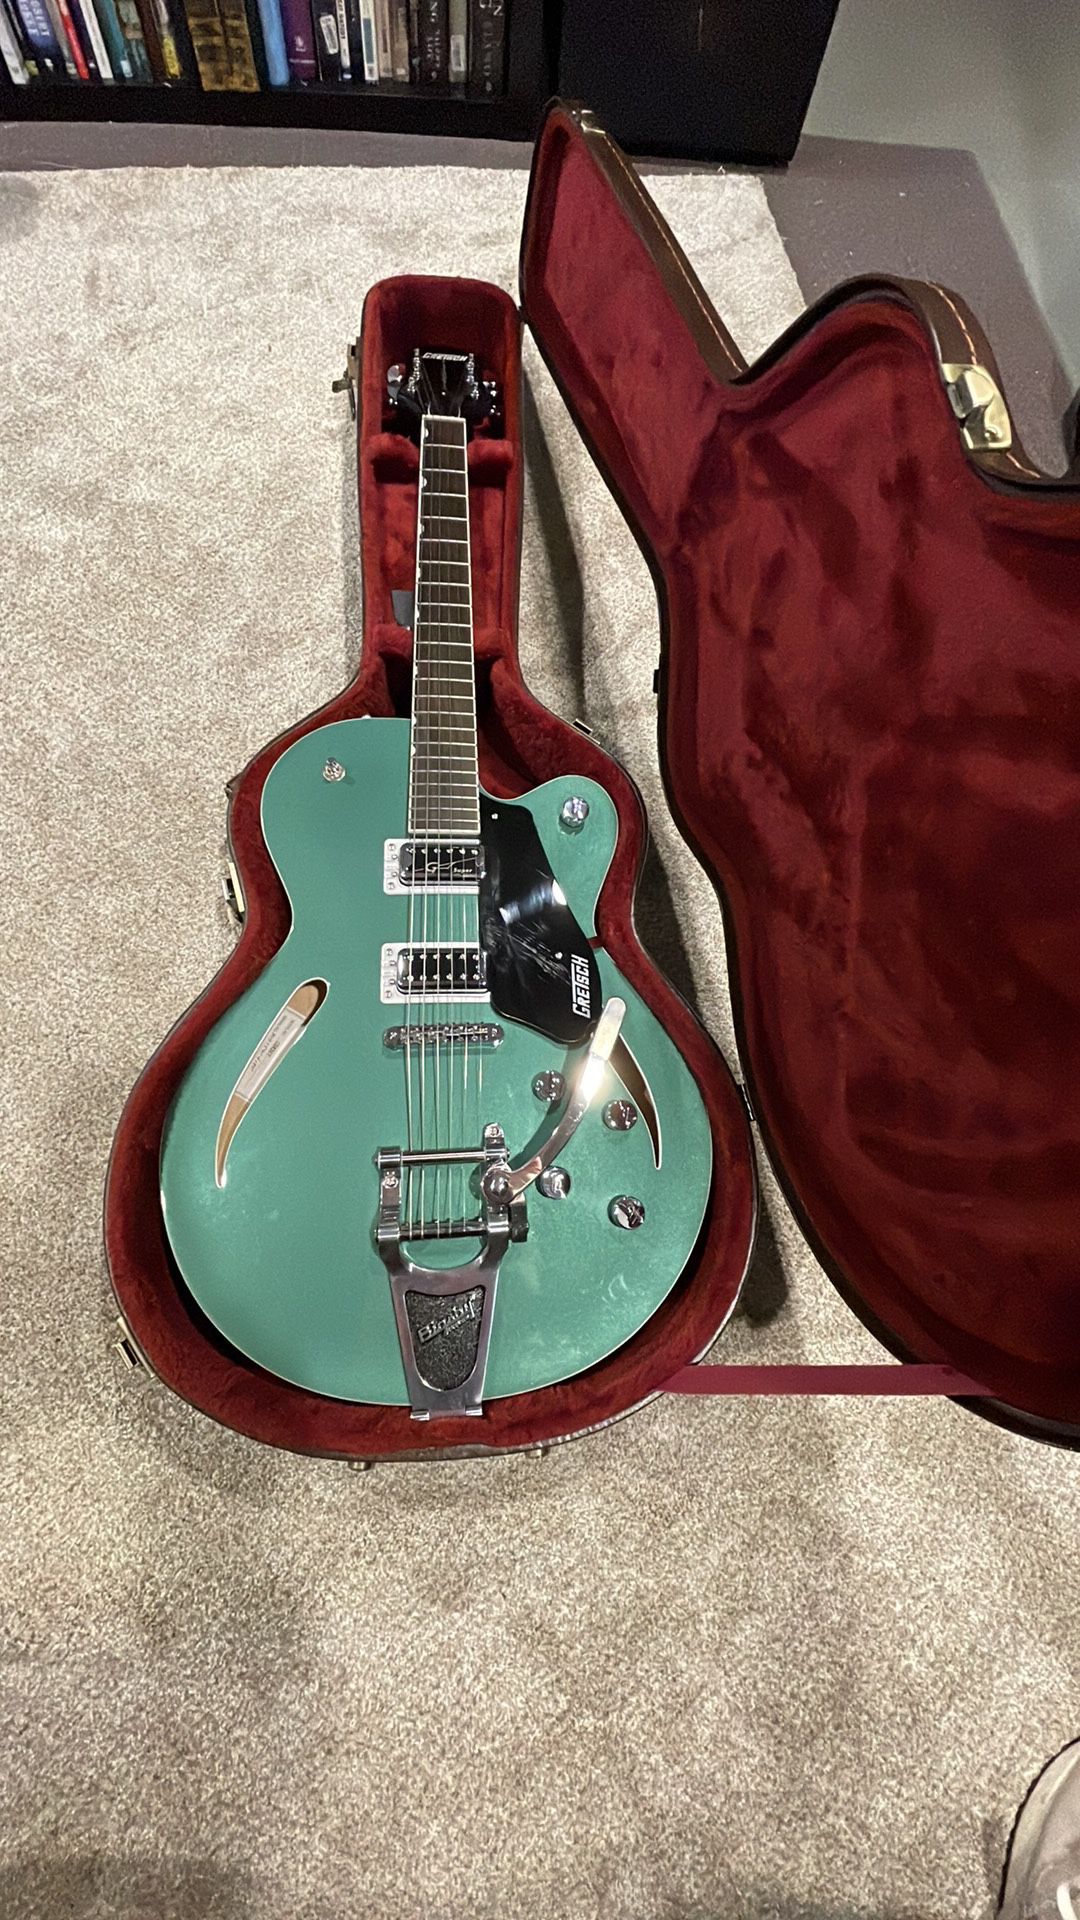 Gretsch G5630T- CB electric guitar with new hard case